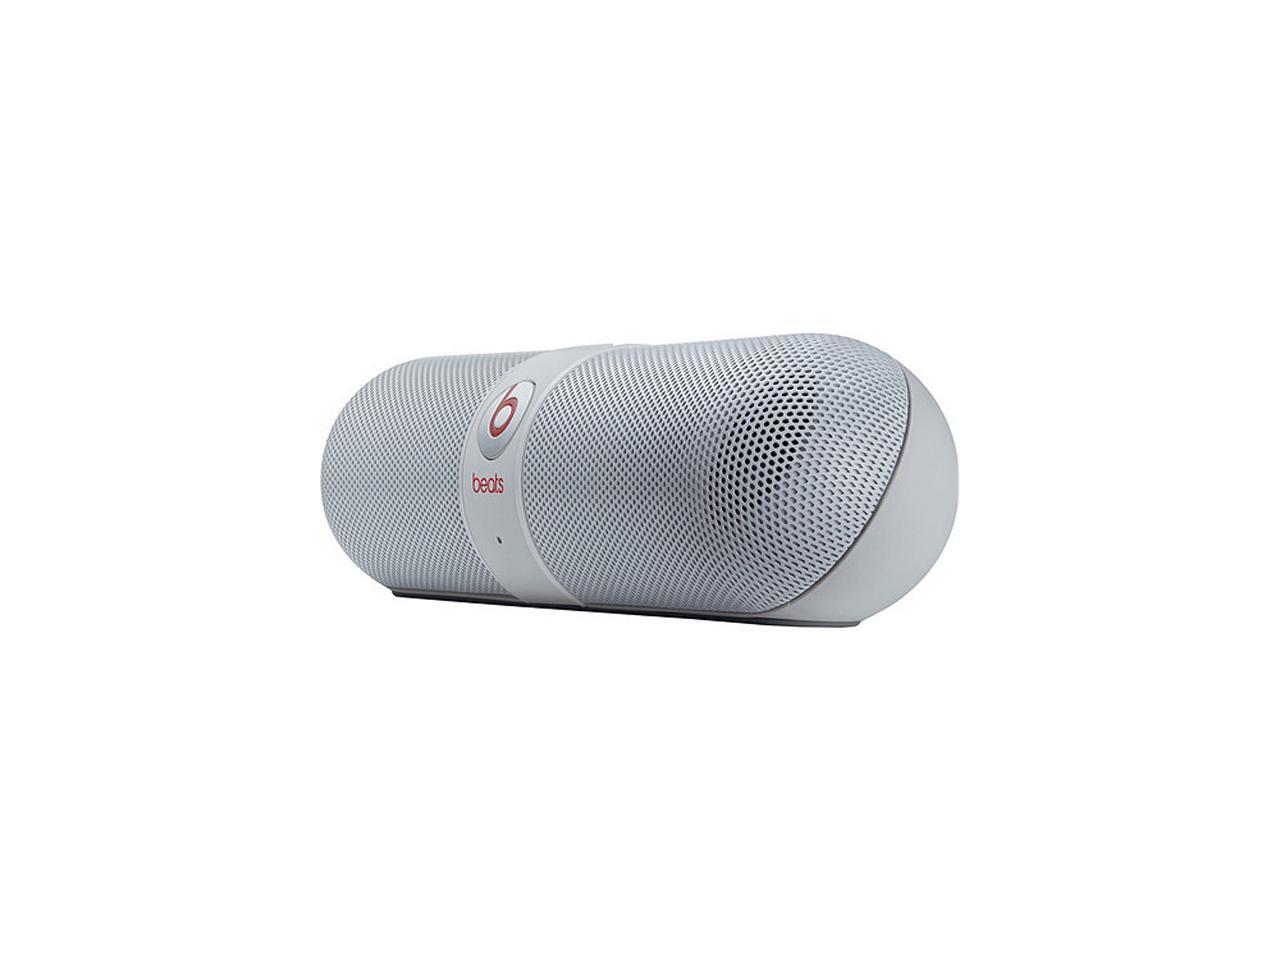 Beats by Dr. Dre - Pill Portable Stereo Speaker - White MH752AM/A